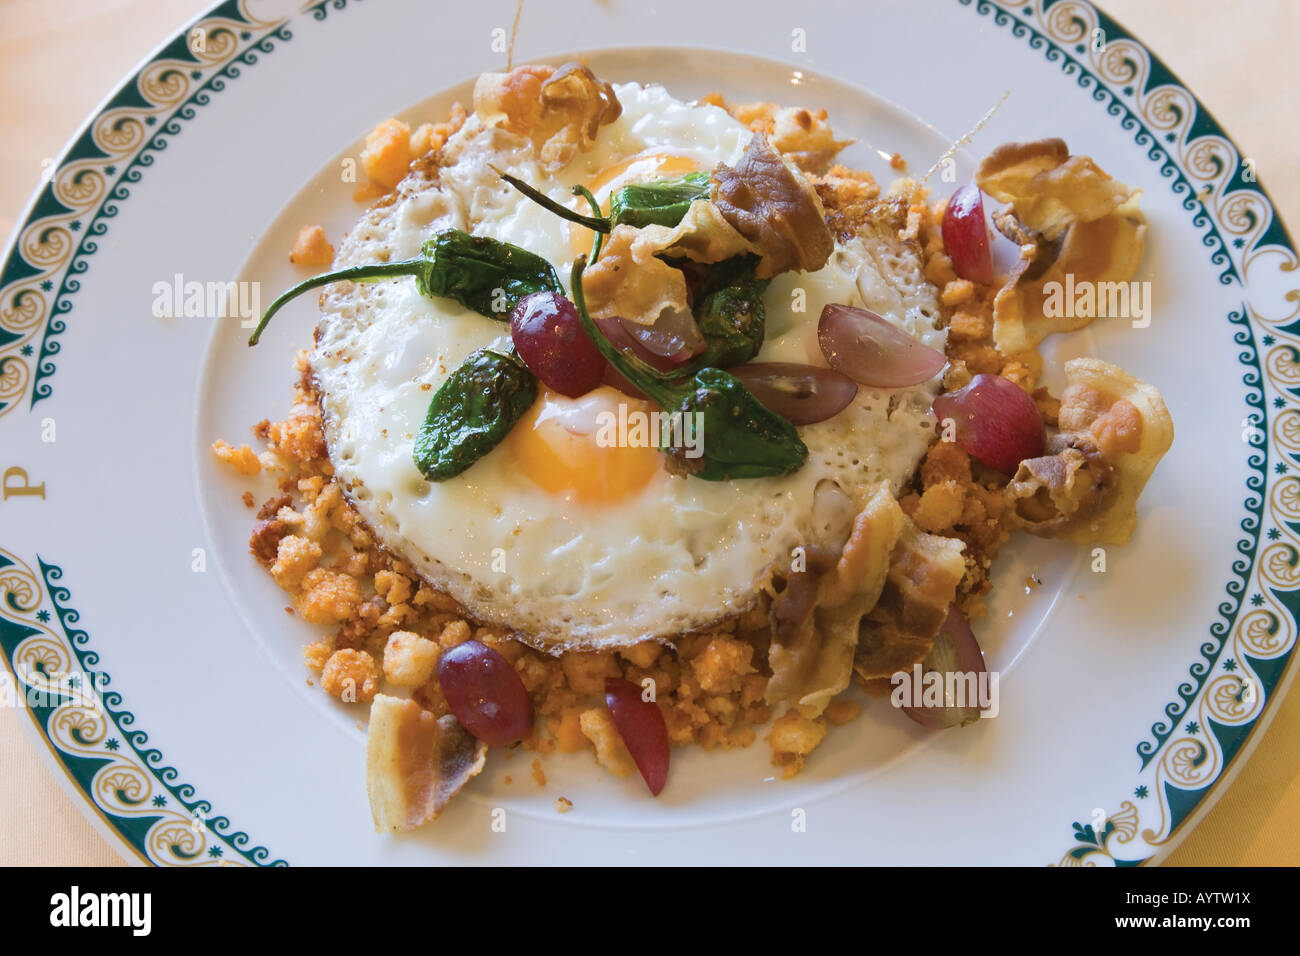 Typical Spanish dish called migas or breadcrumbs served on plate of Parador  Nacional Ronda Malaga Province Spain Stock Photo - Alamy